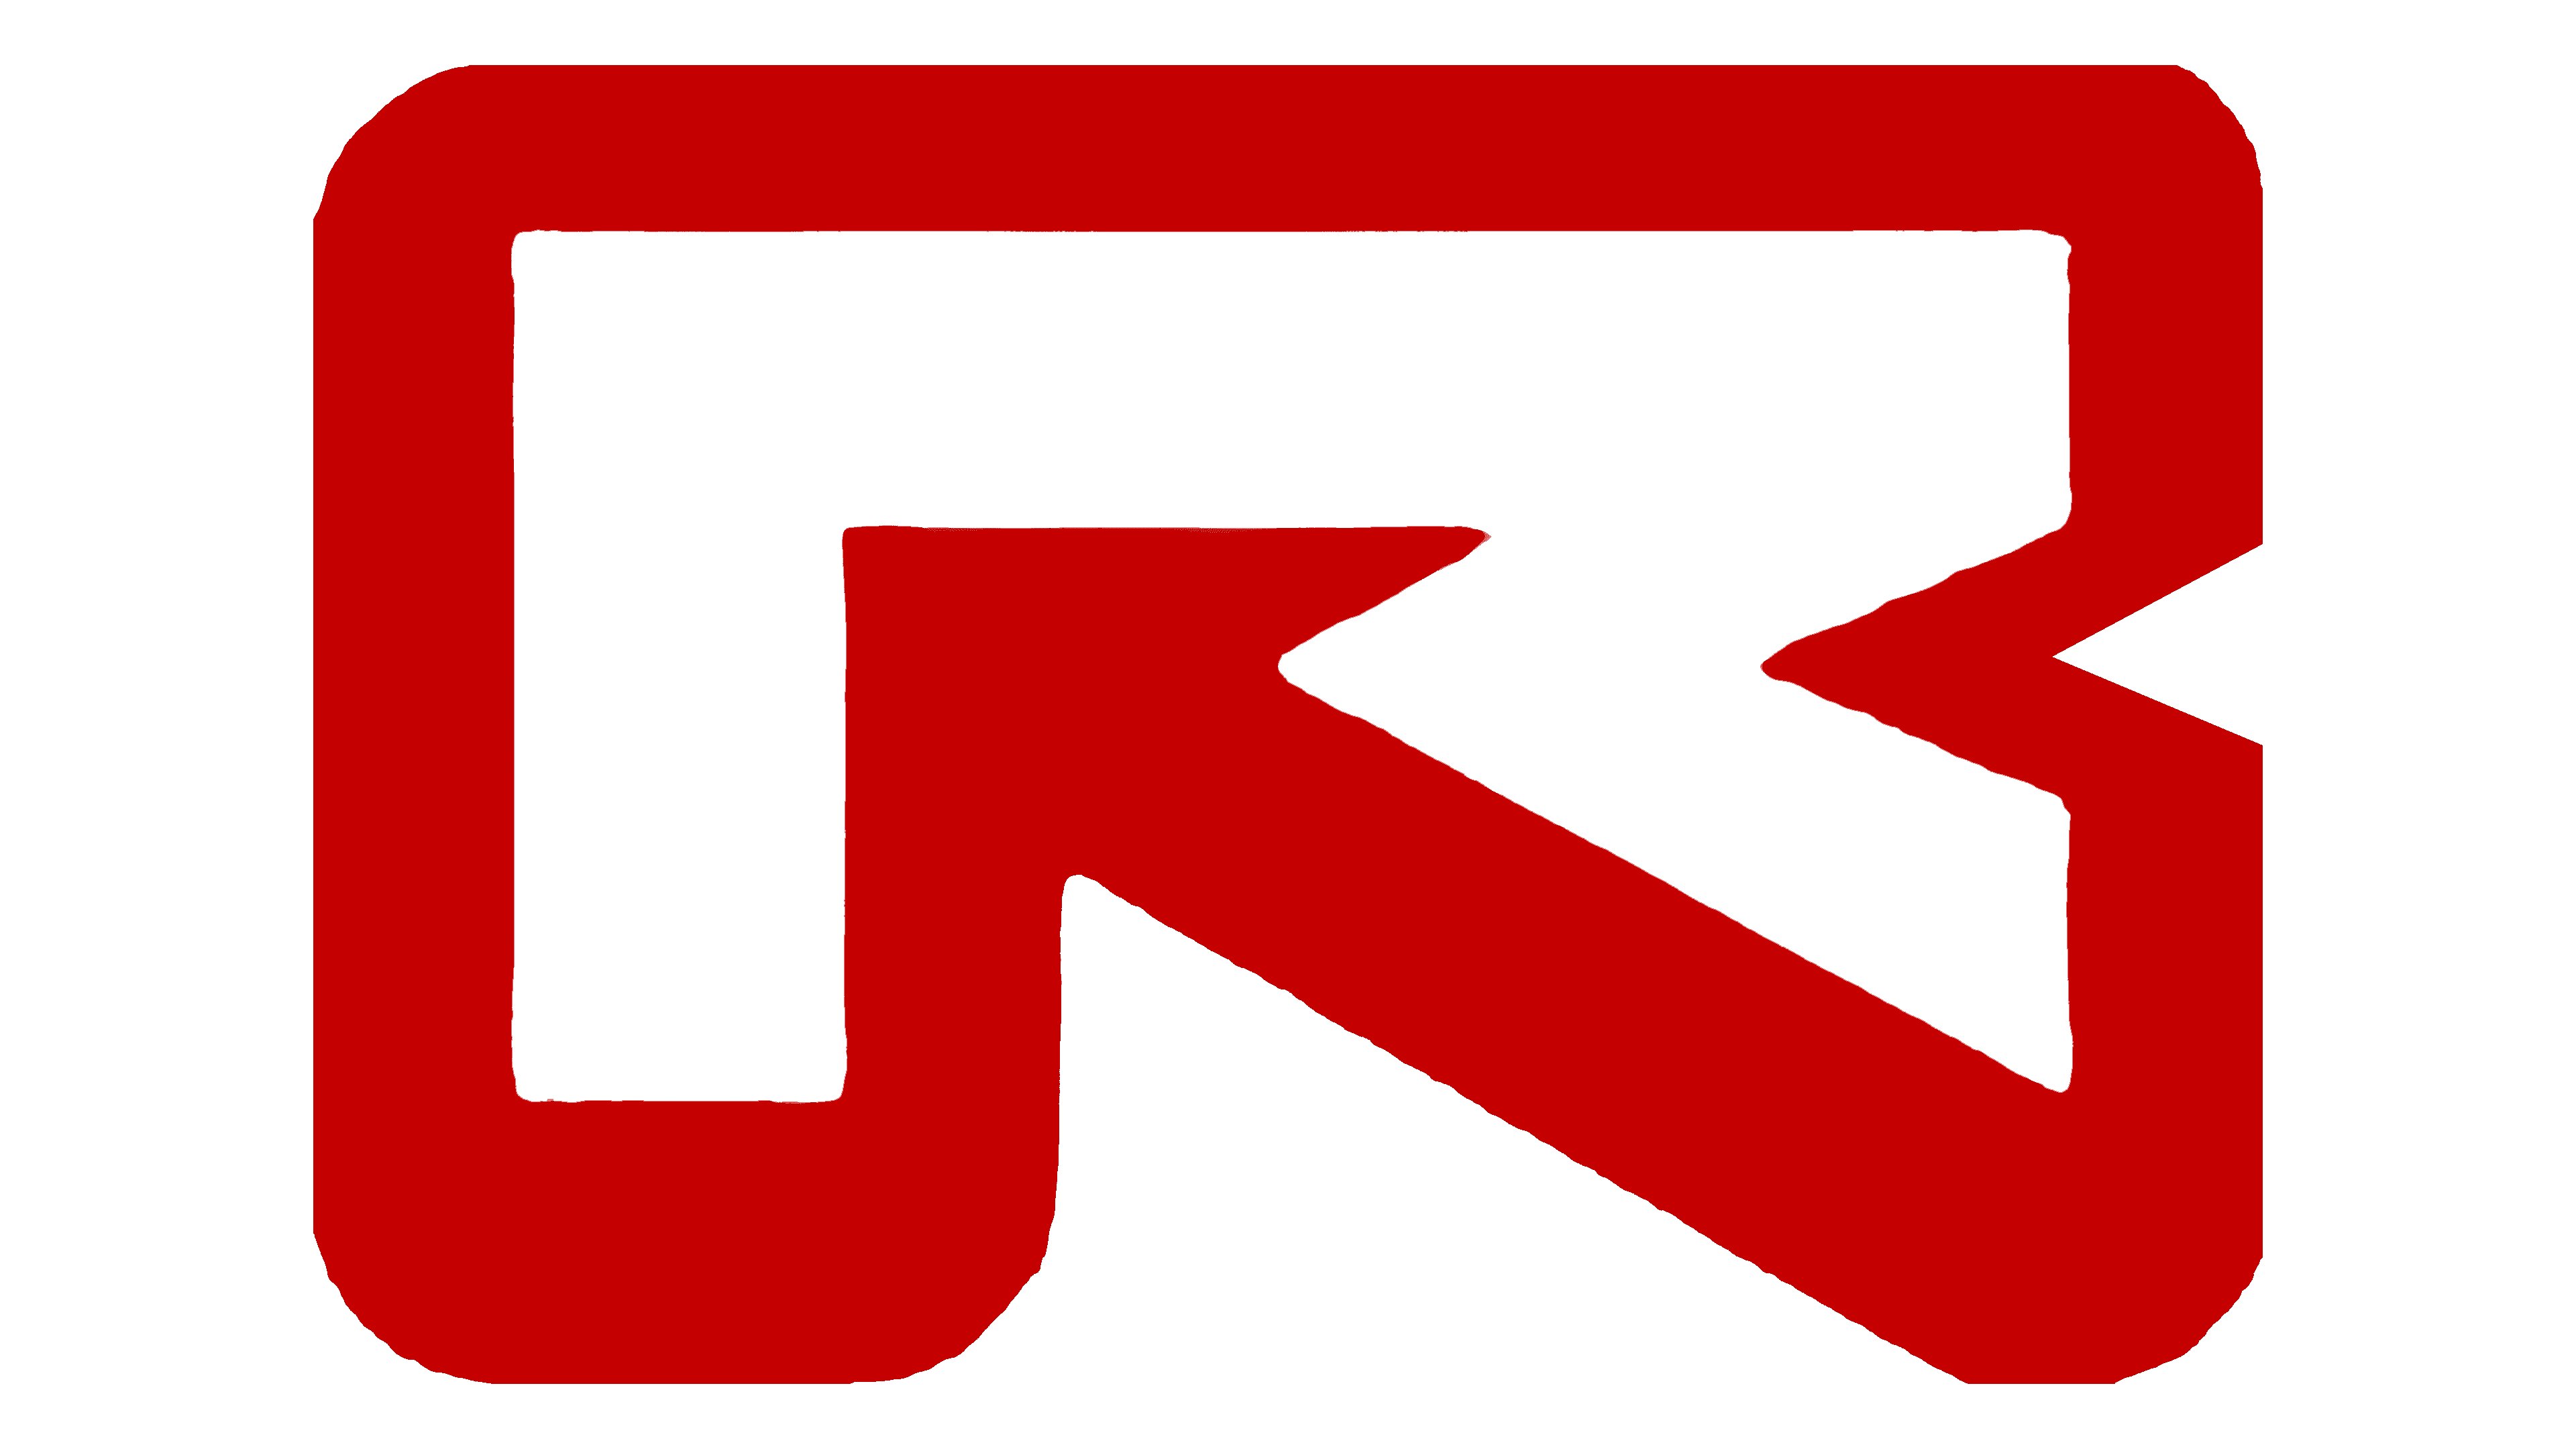 Roblox logo and symbol, meaning, history, PNG